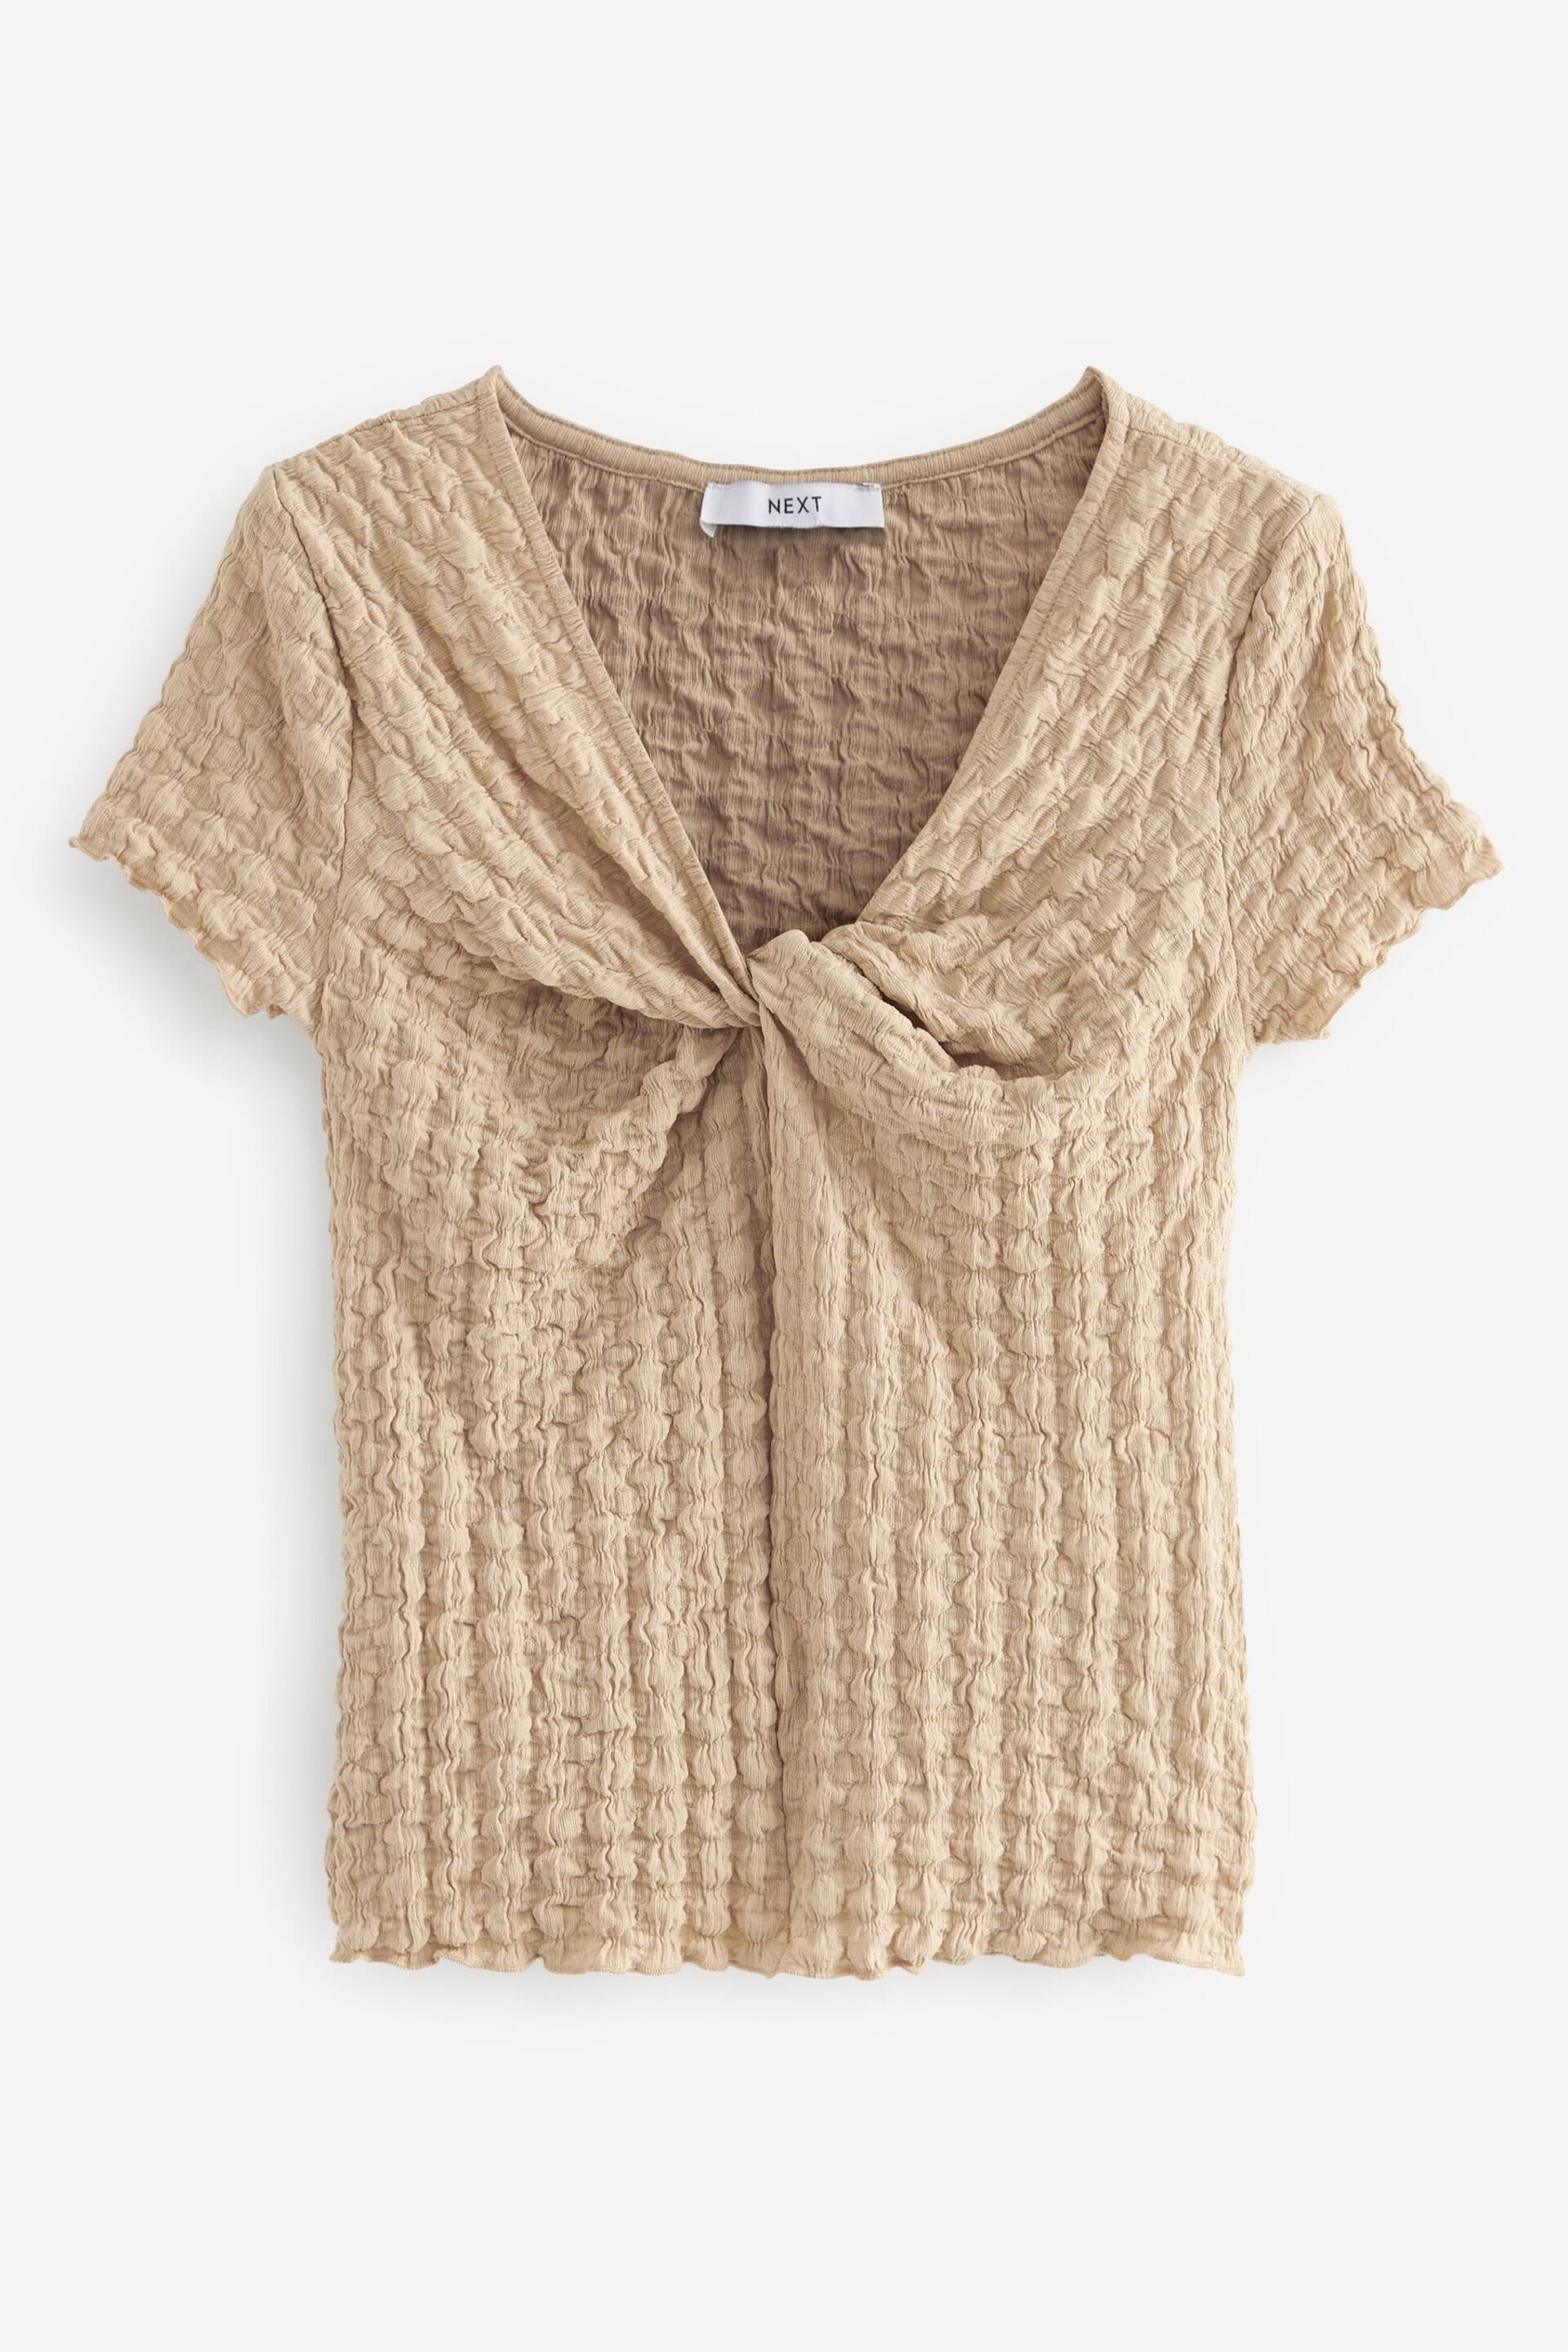 Neutral Textured Twist Front Short Sleeve Top - Image 6 of 7